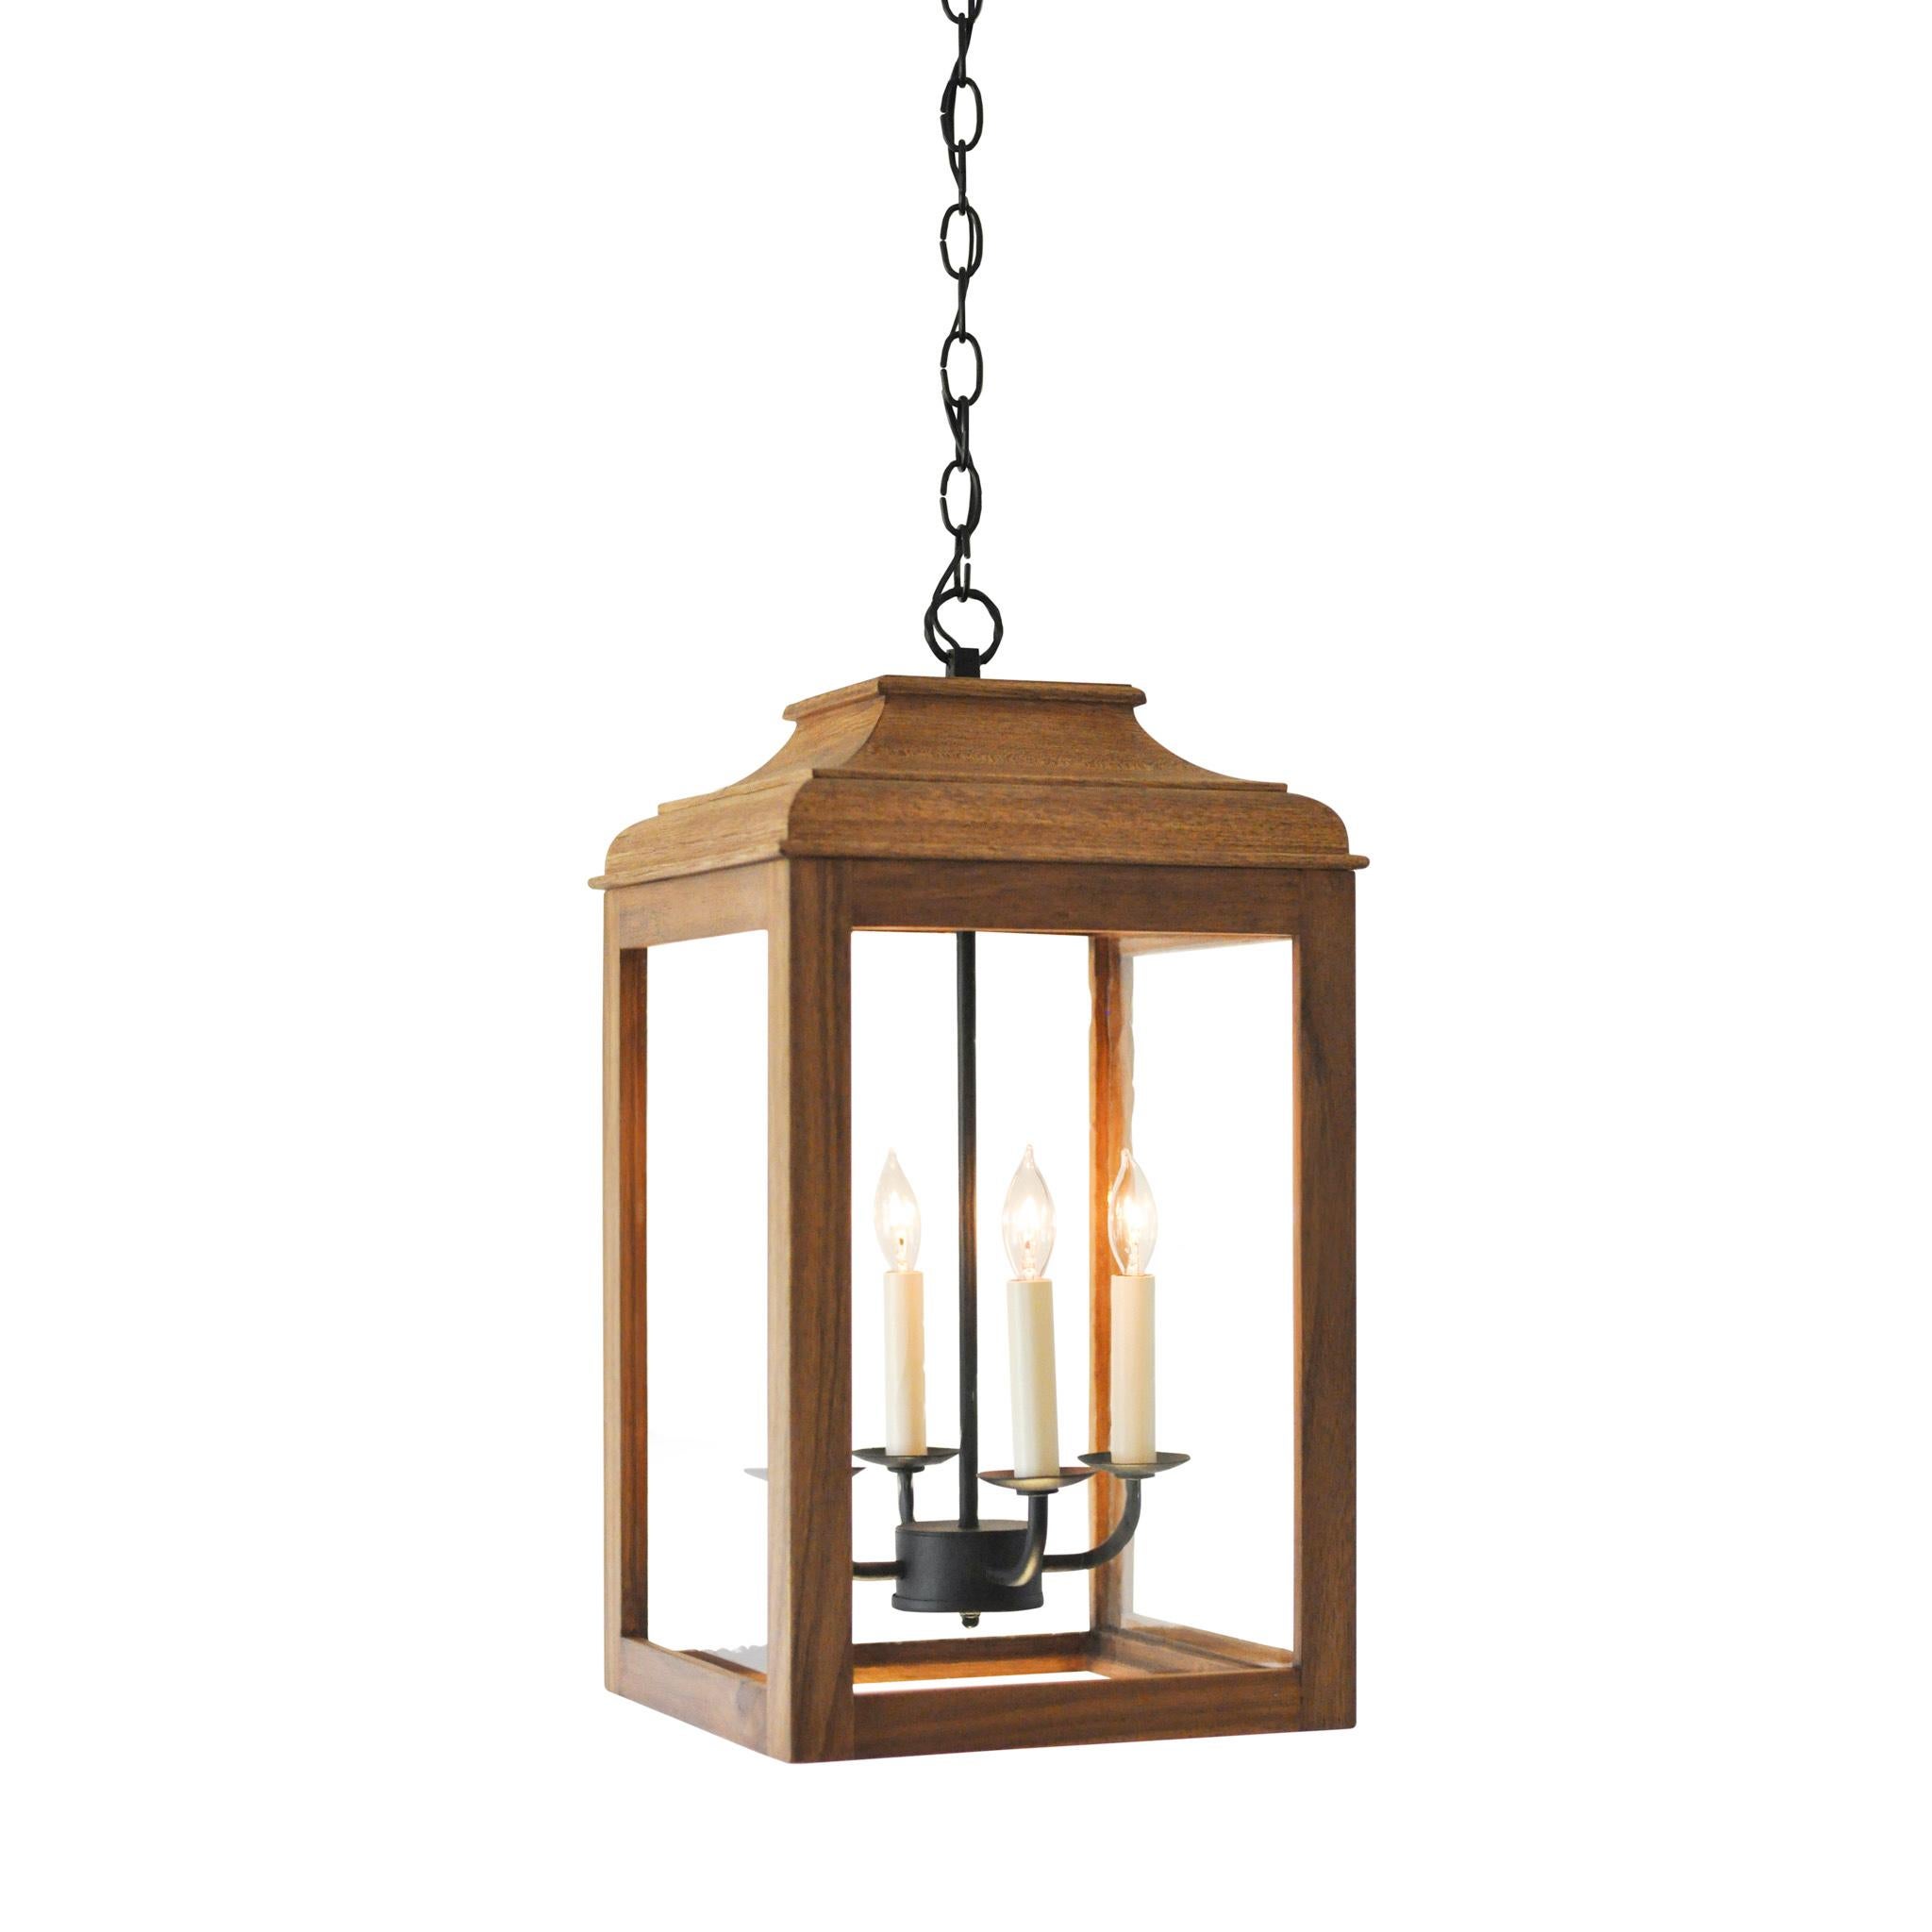 Lutyens Hanging Lantern, Estate, Finish Natural Wood, Charred Iron Candle Holder In New Condition For Sale In Paoli, PA